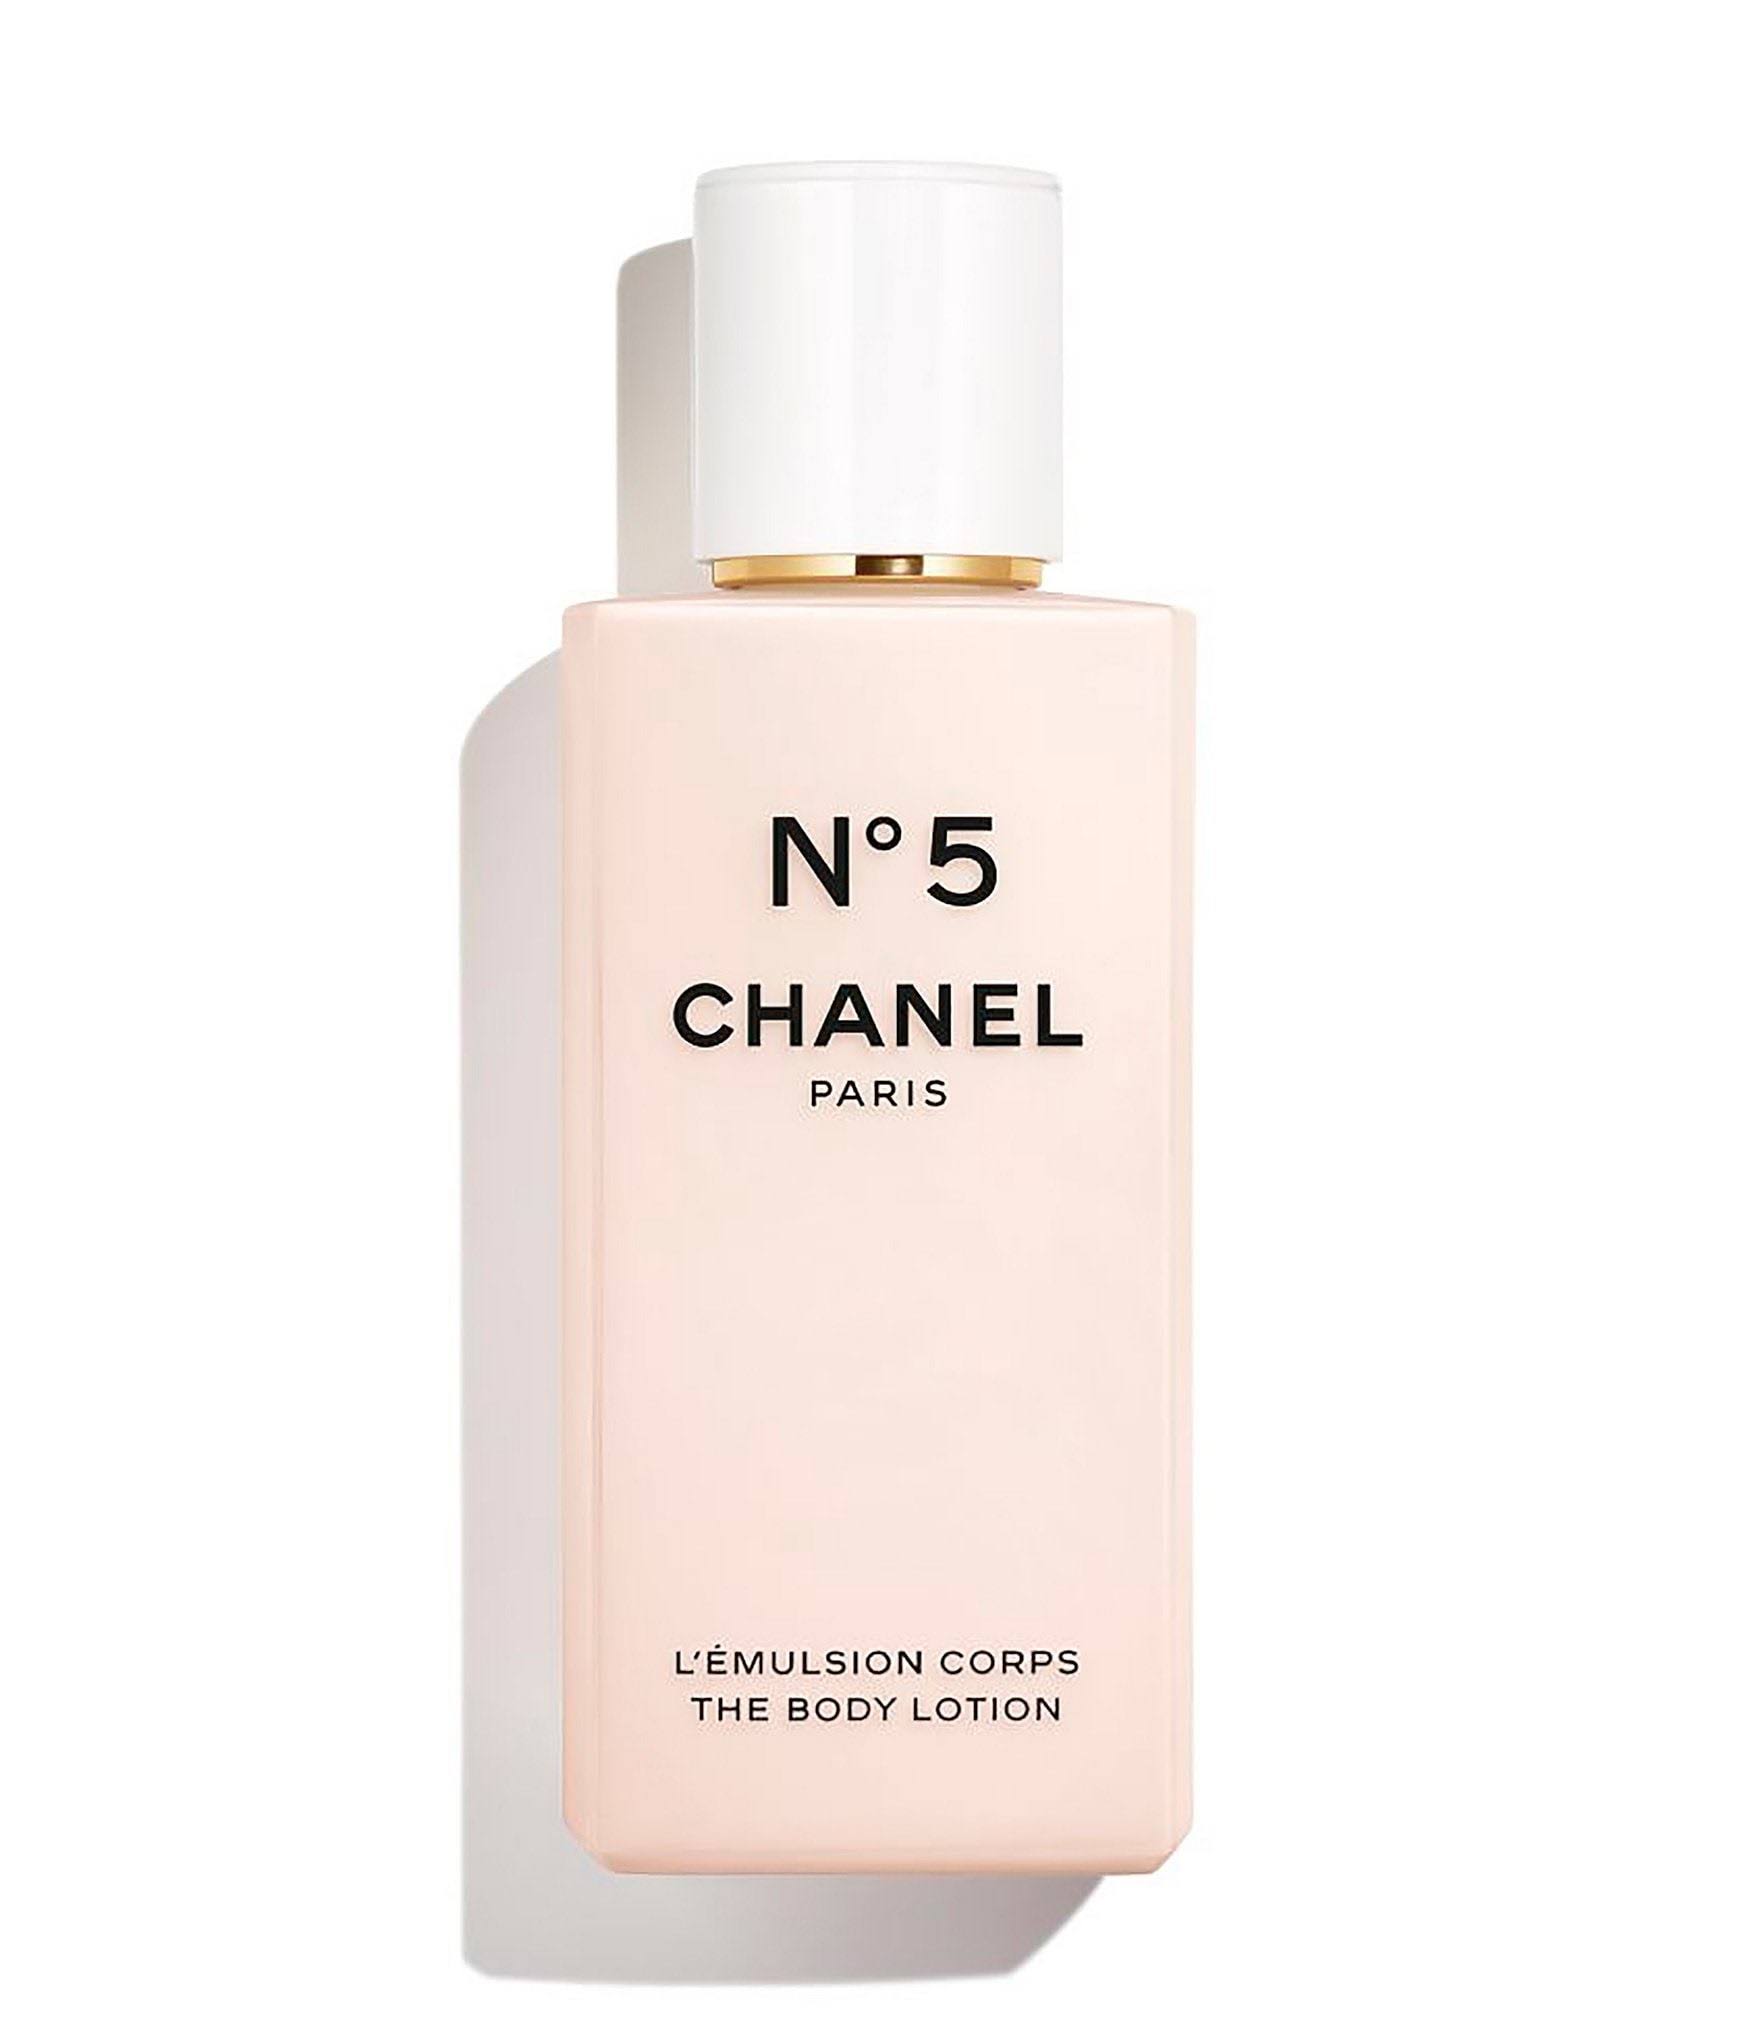 Chanel No 5 The Body Lotion 200 ml